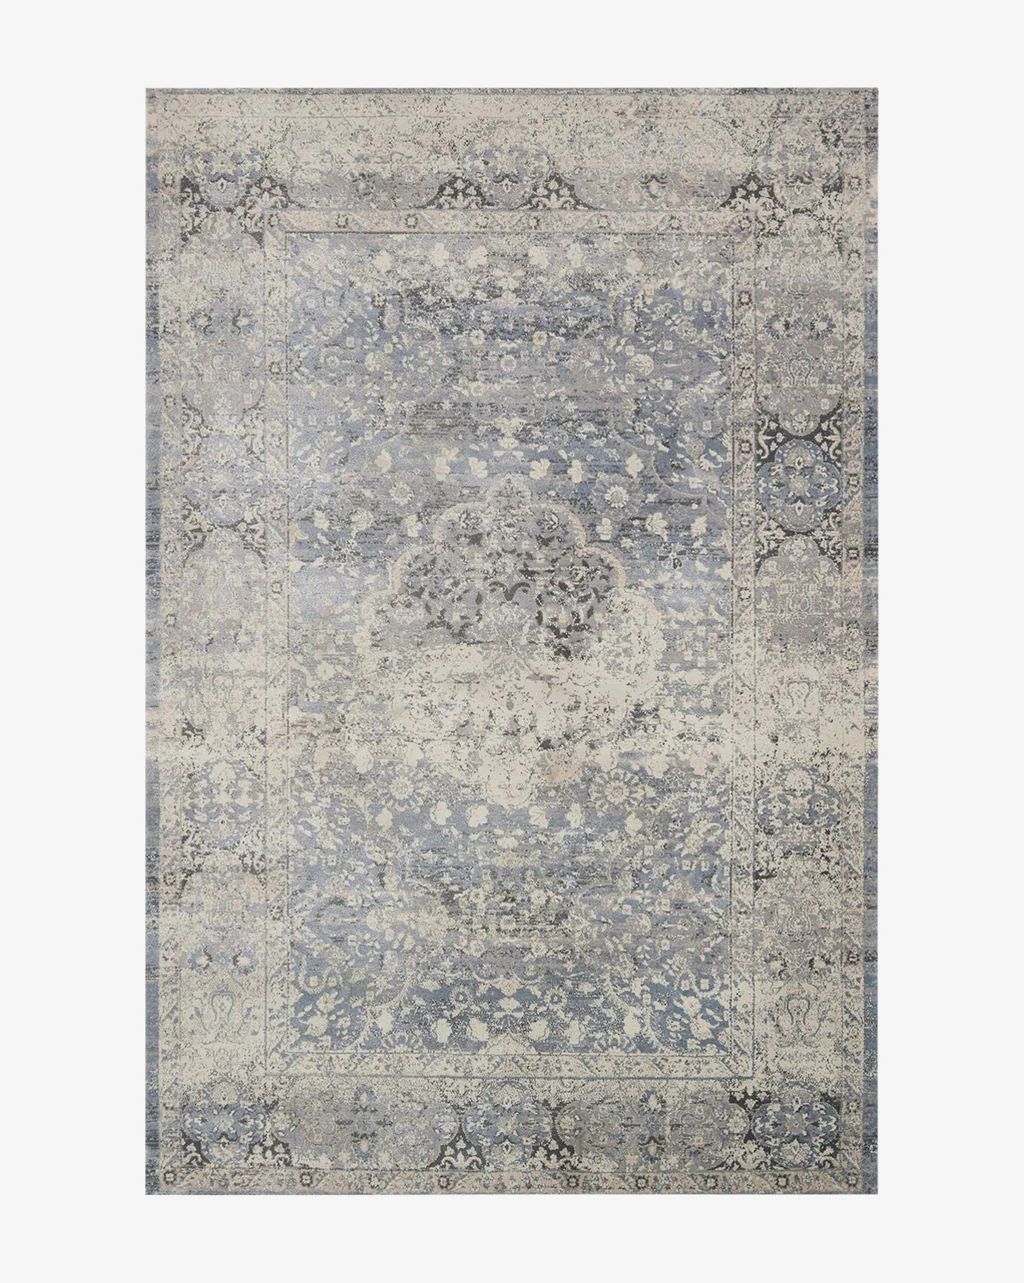 Eindhoven Patterned Rug | McGee & Co.